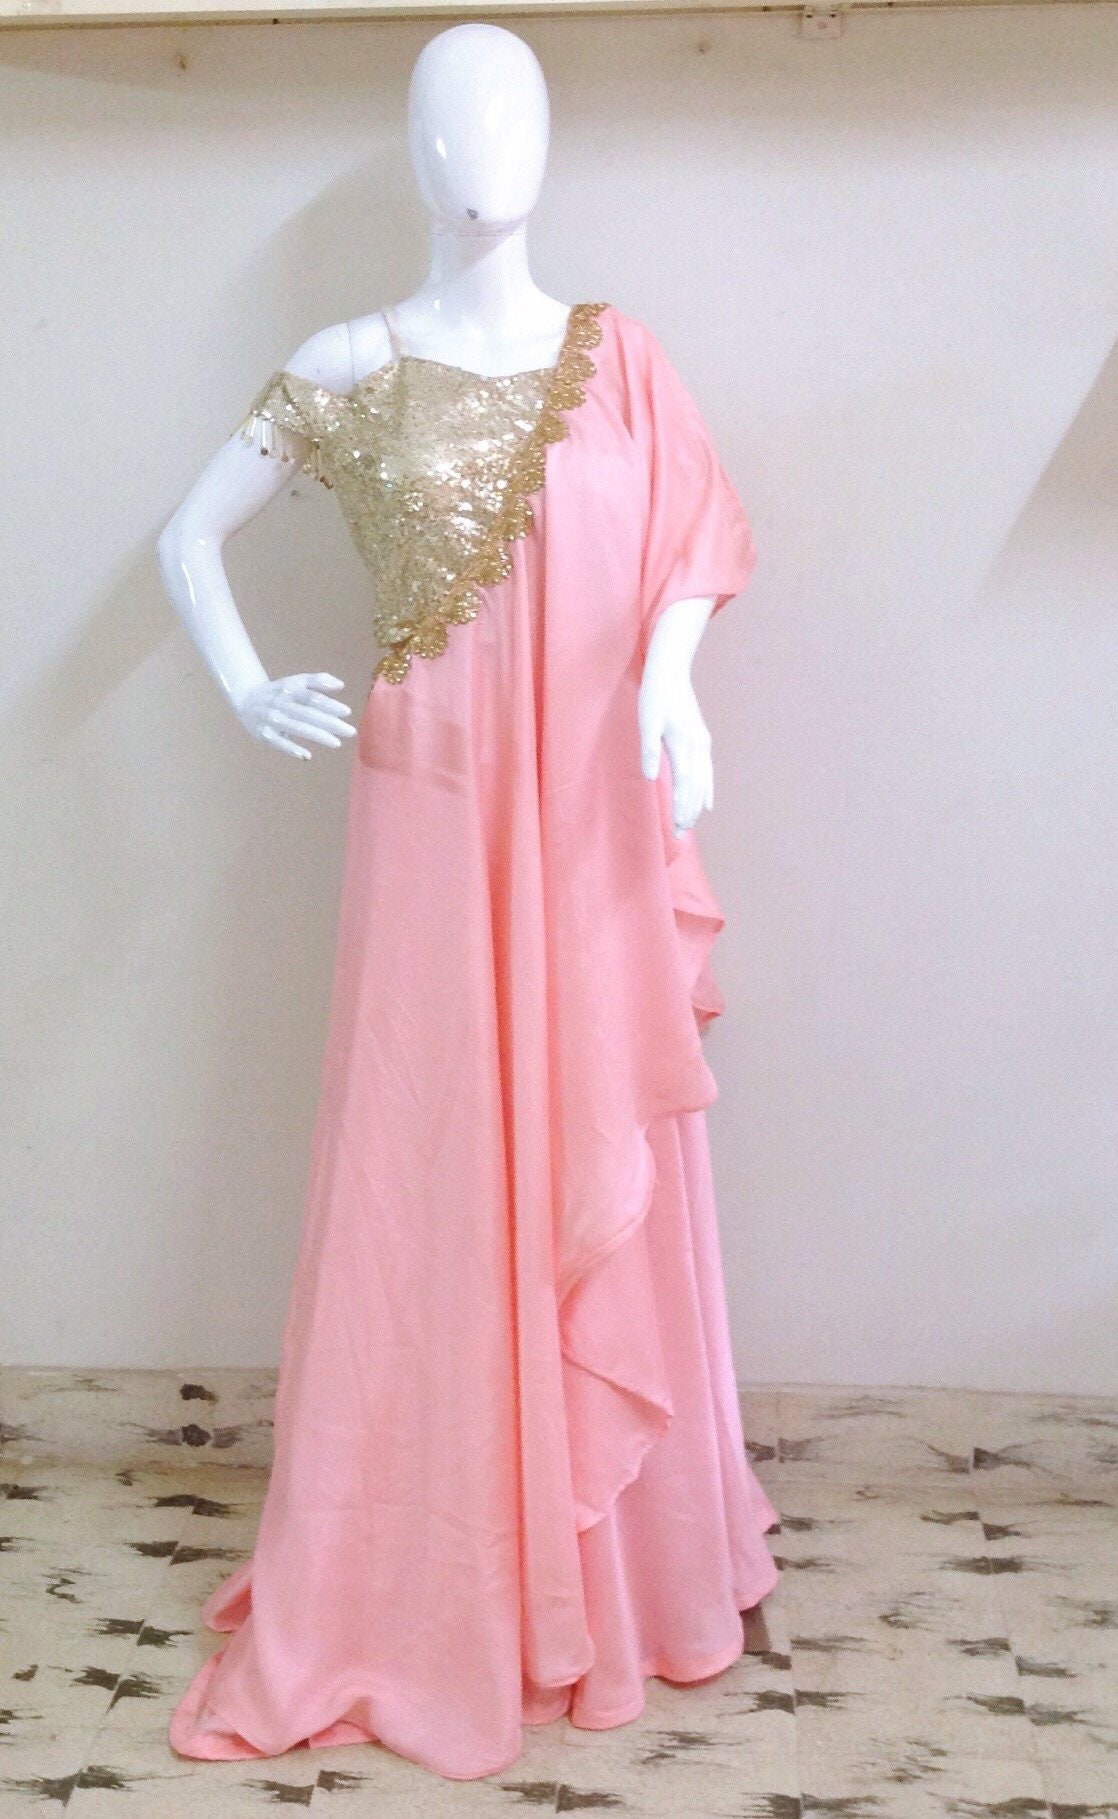 Coral Gown with Embellished Long Sleeves | Coral gown, Gowns, Western gown